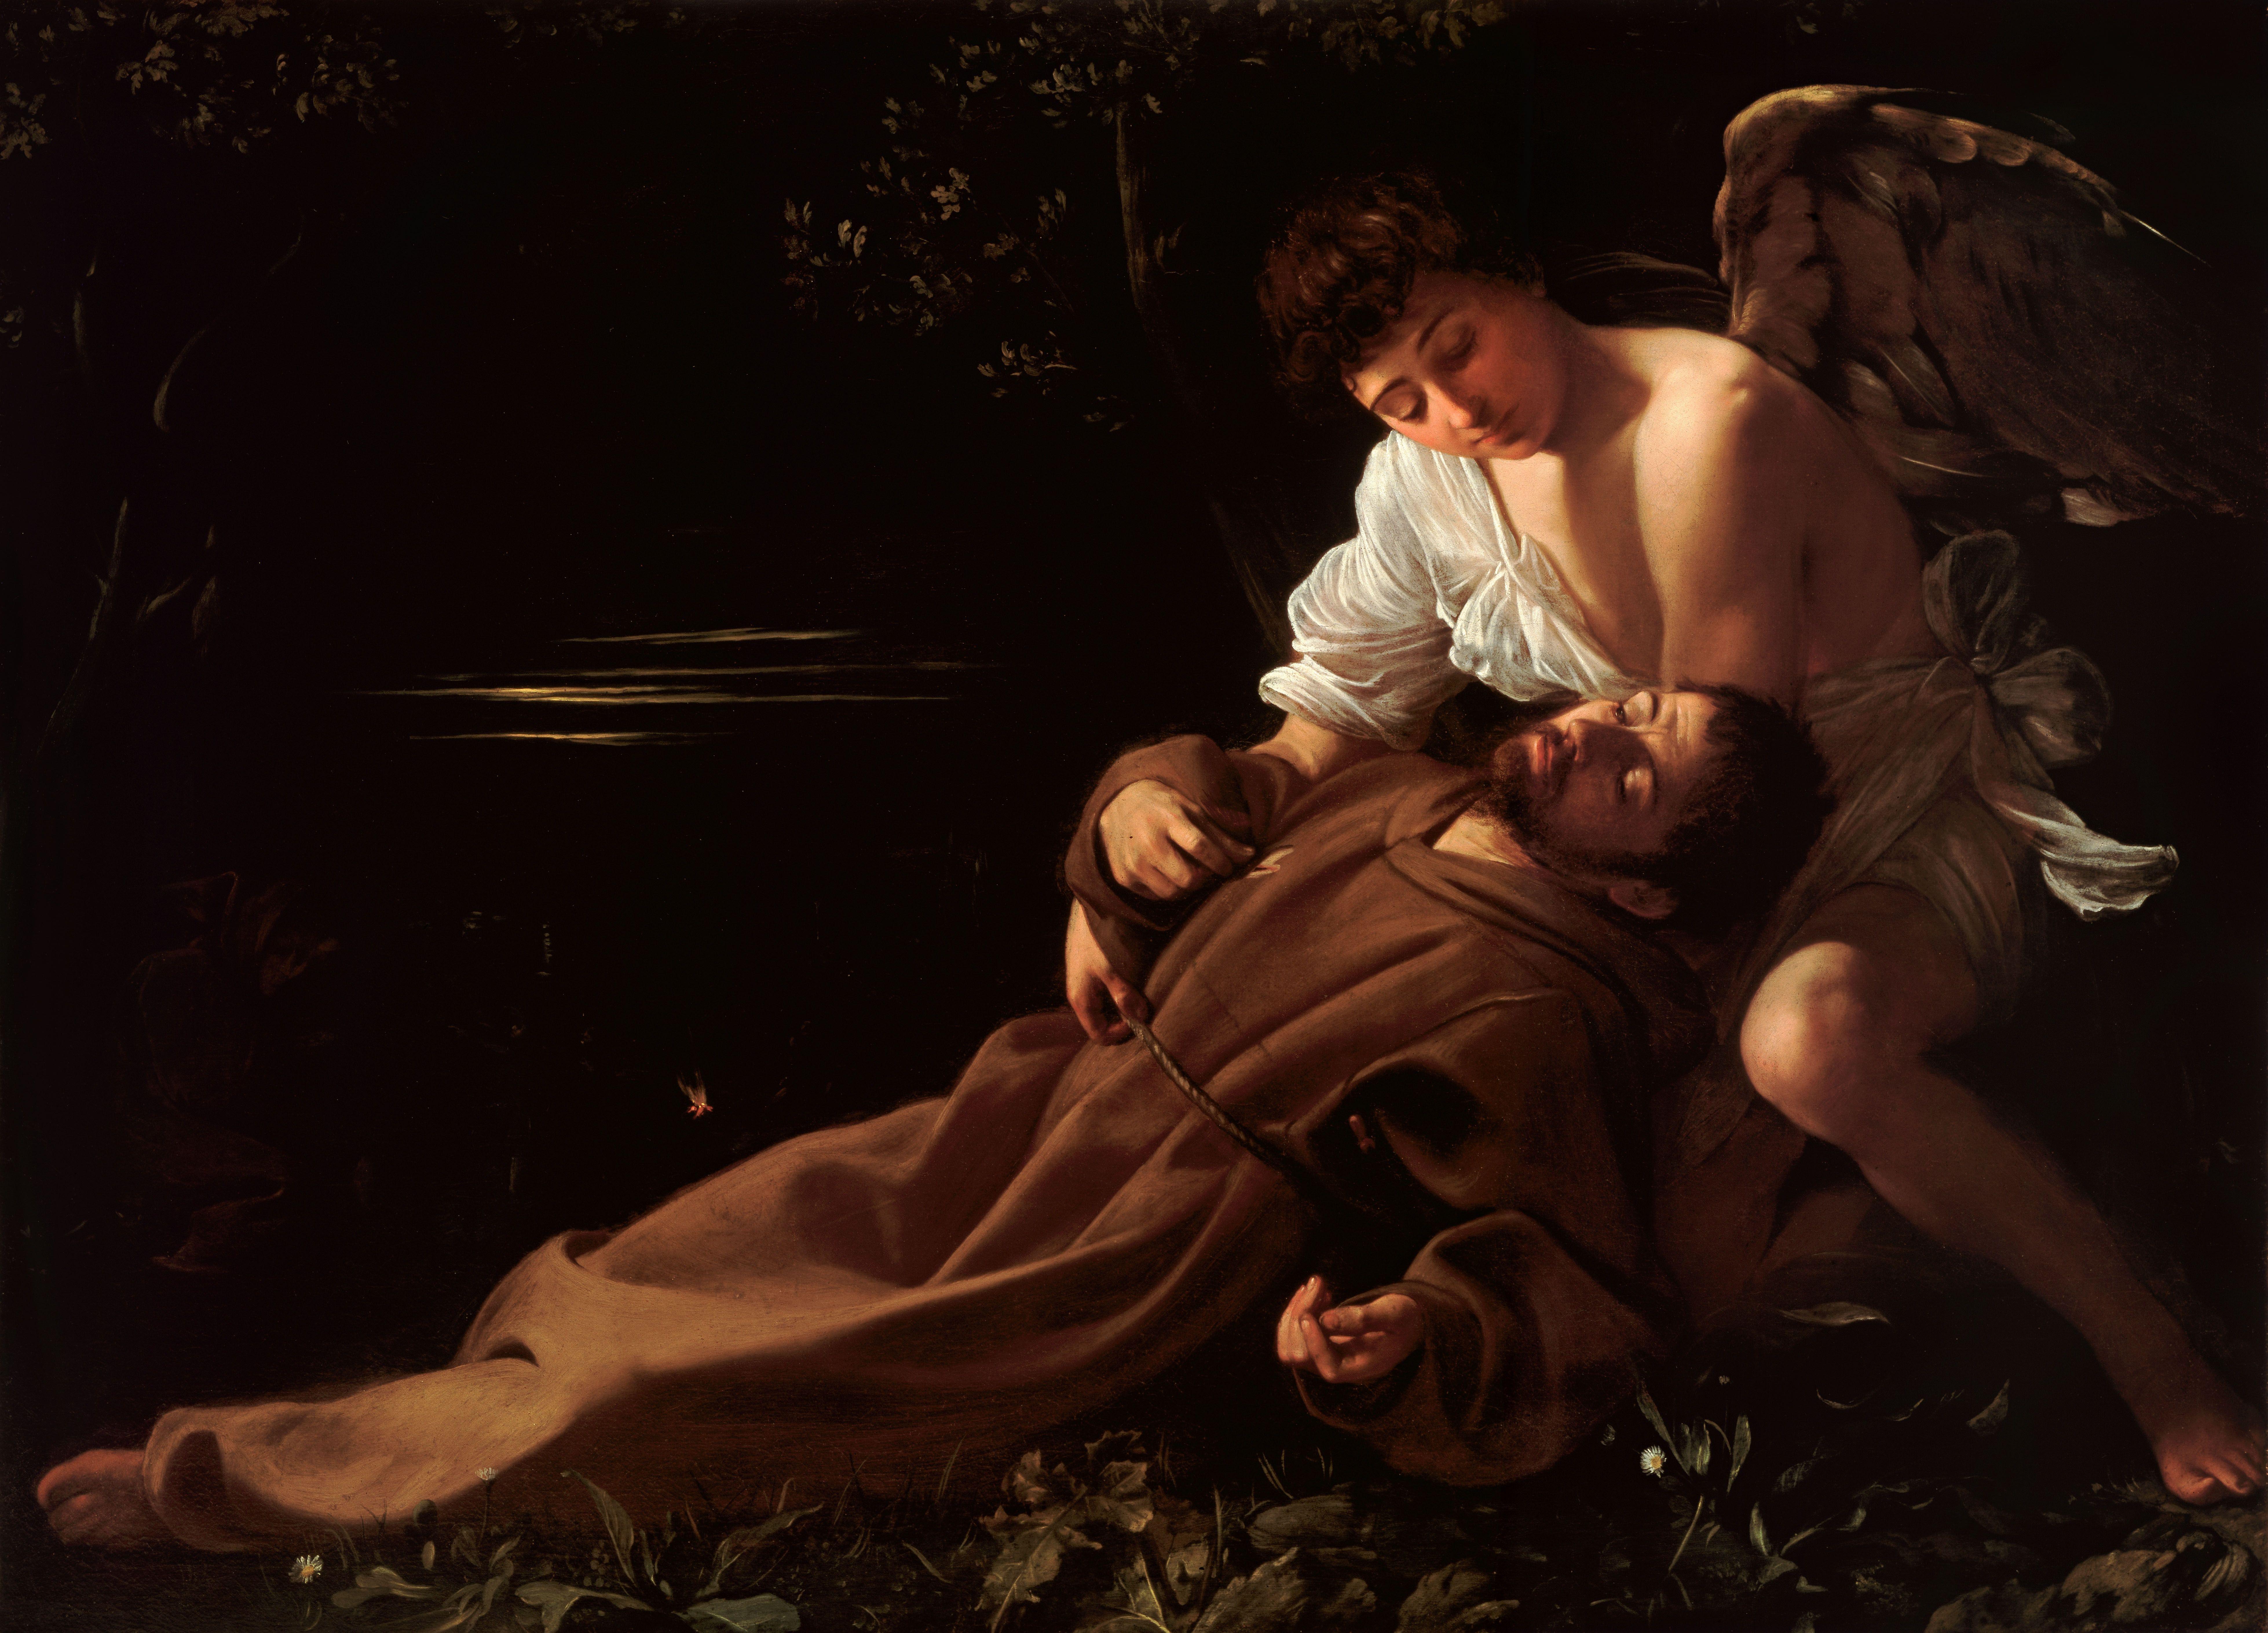 https://uploads4.wikiart.org/00129/images/caravaggio/saint-francis-of-assisi-in-ecstasy.jpg